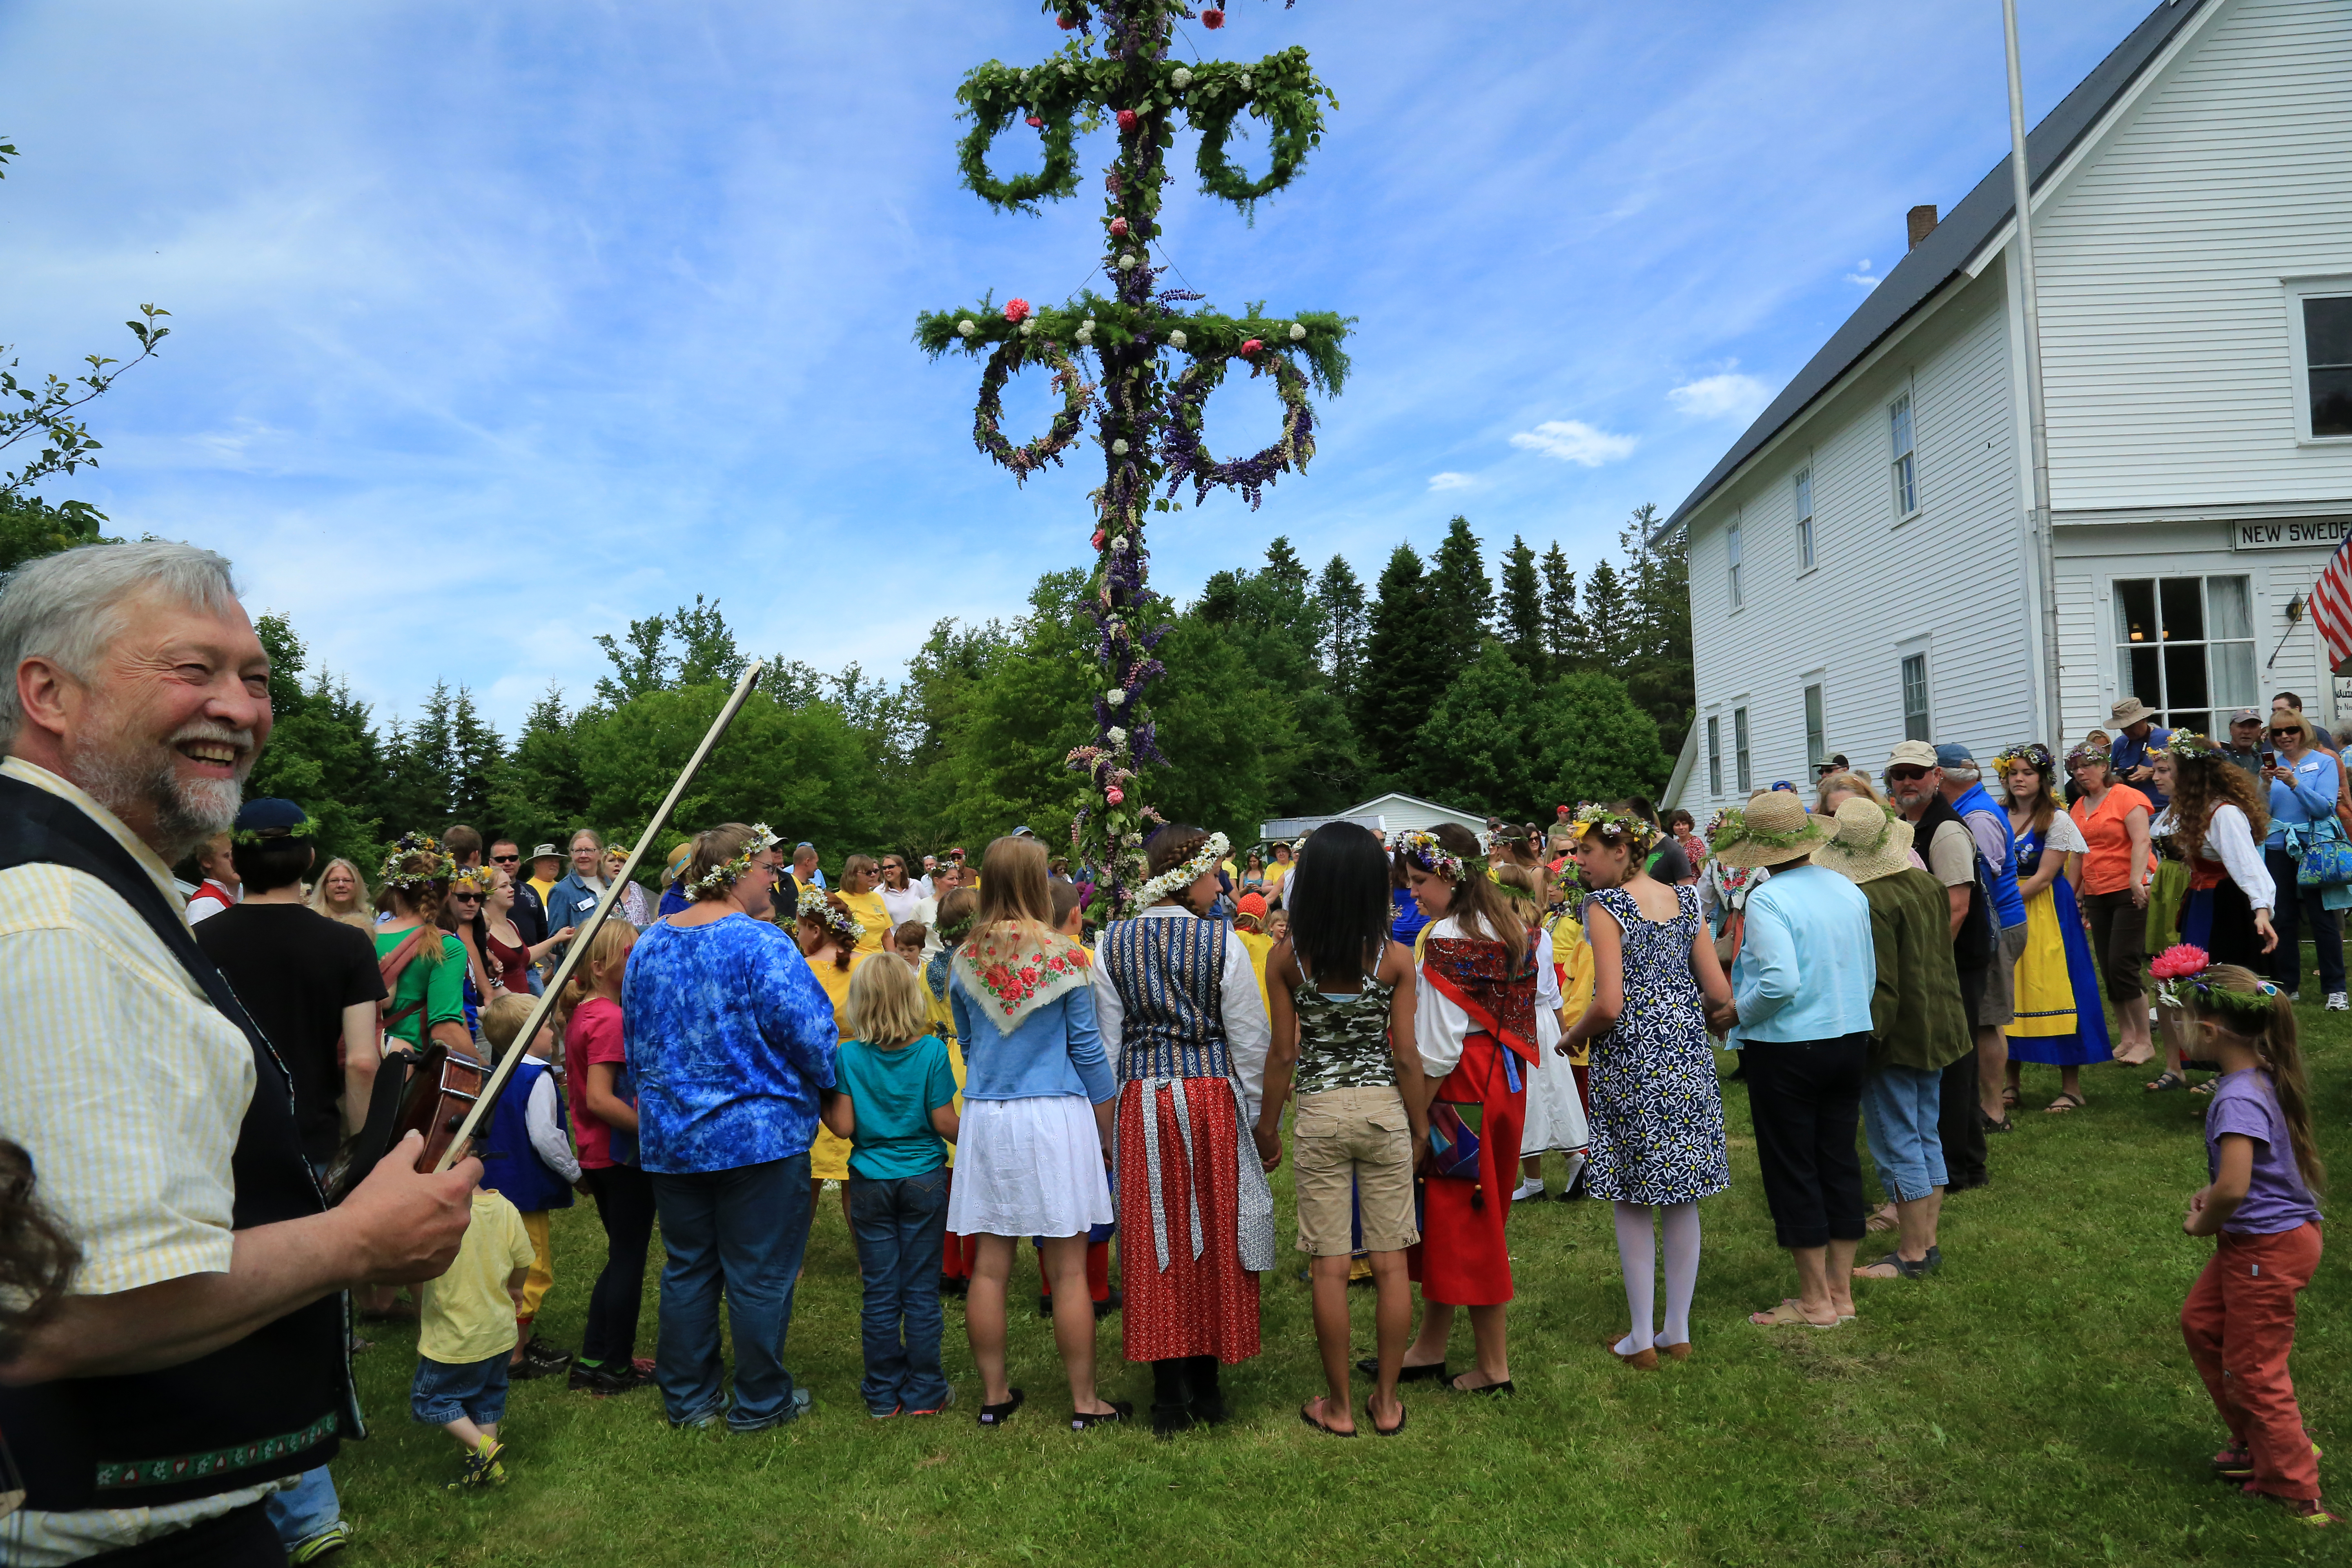 New Sweden keeps Scandinavian traditions alive at the summer solstace.